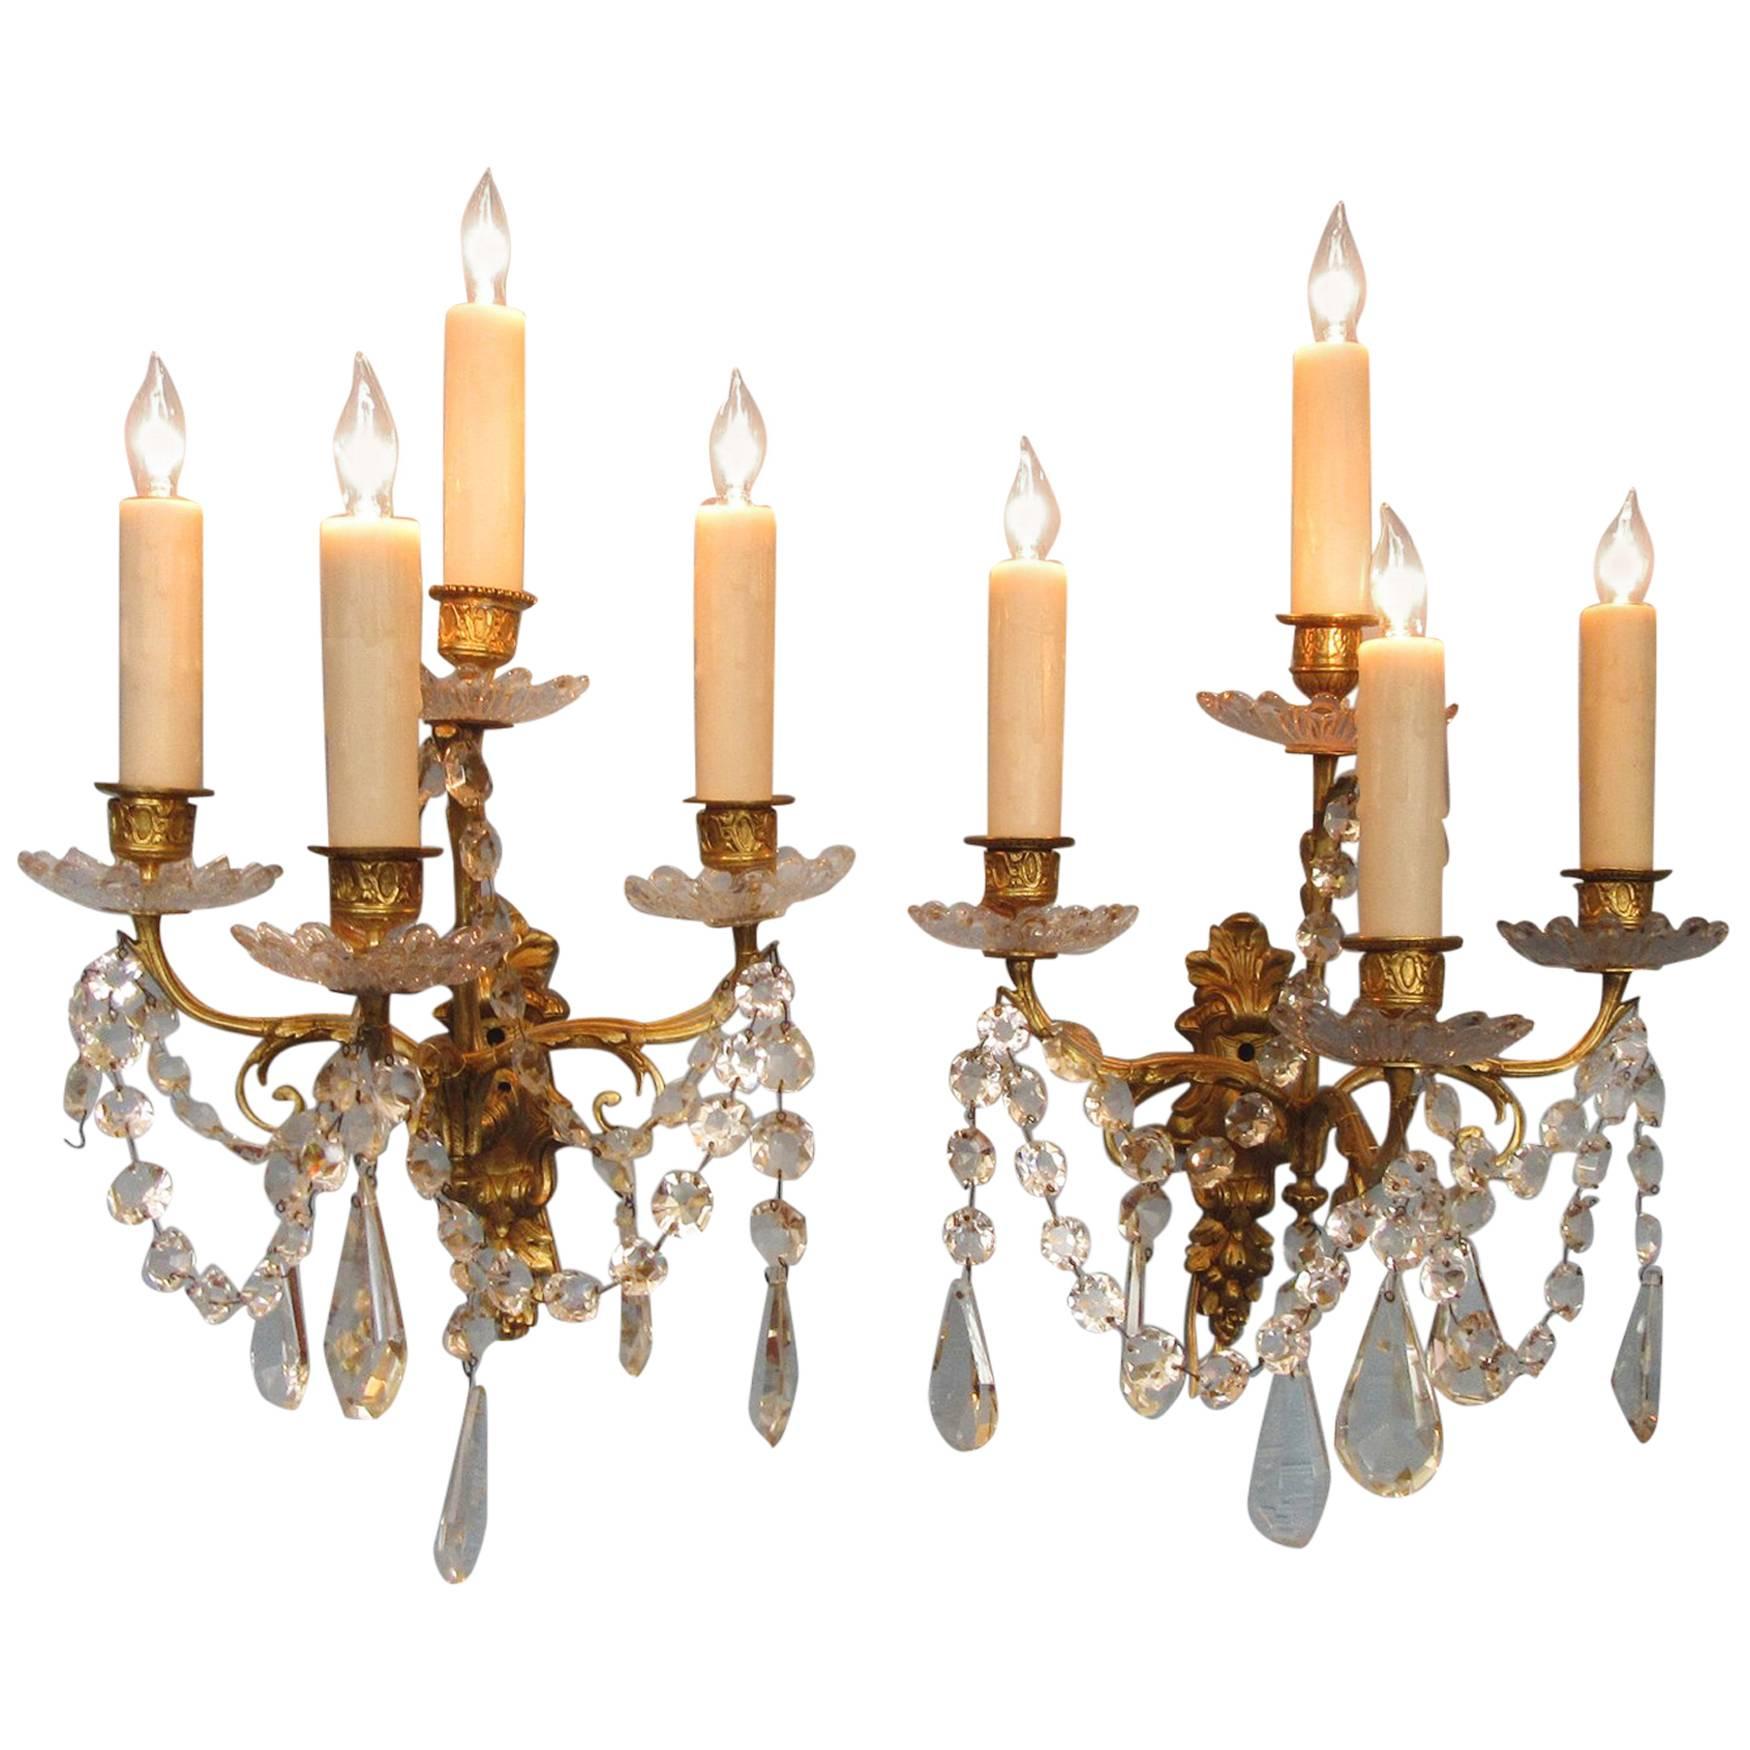 Pair of Early 19th Century French Regence Crystal and Bronze Dore Sconces